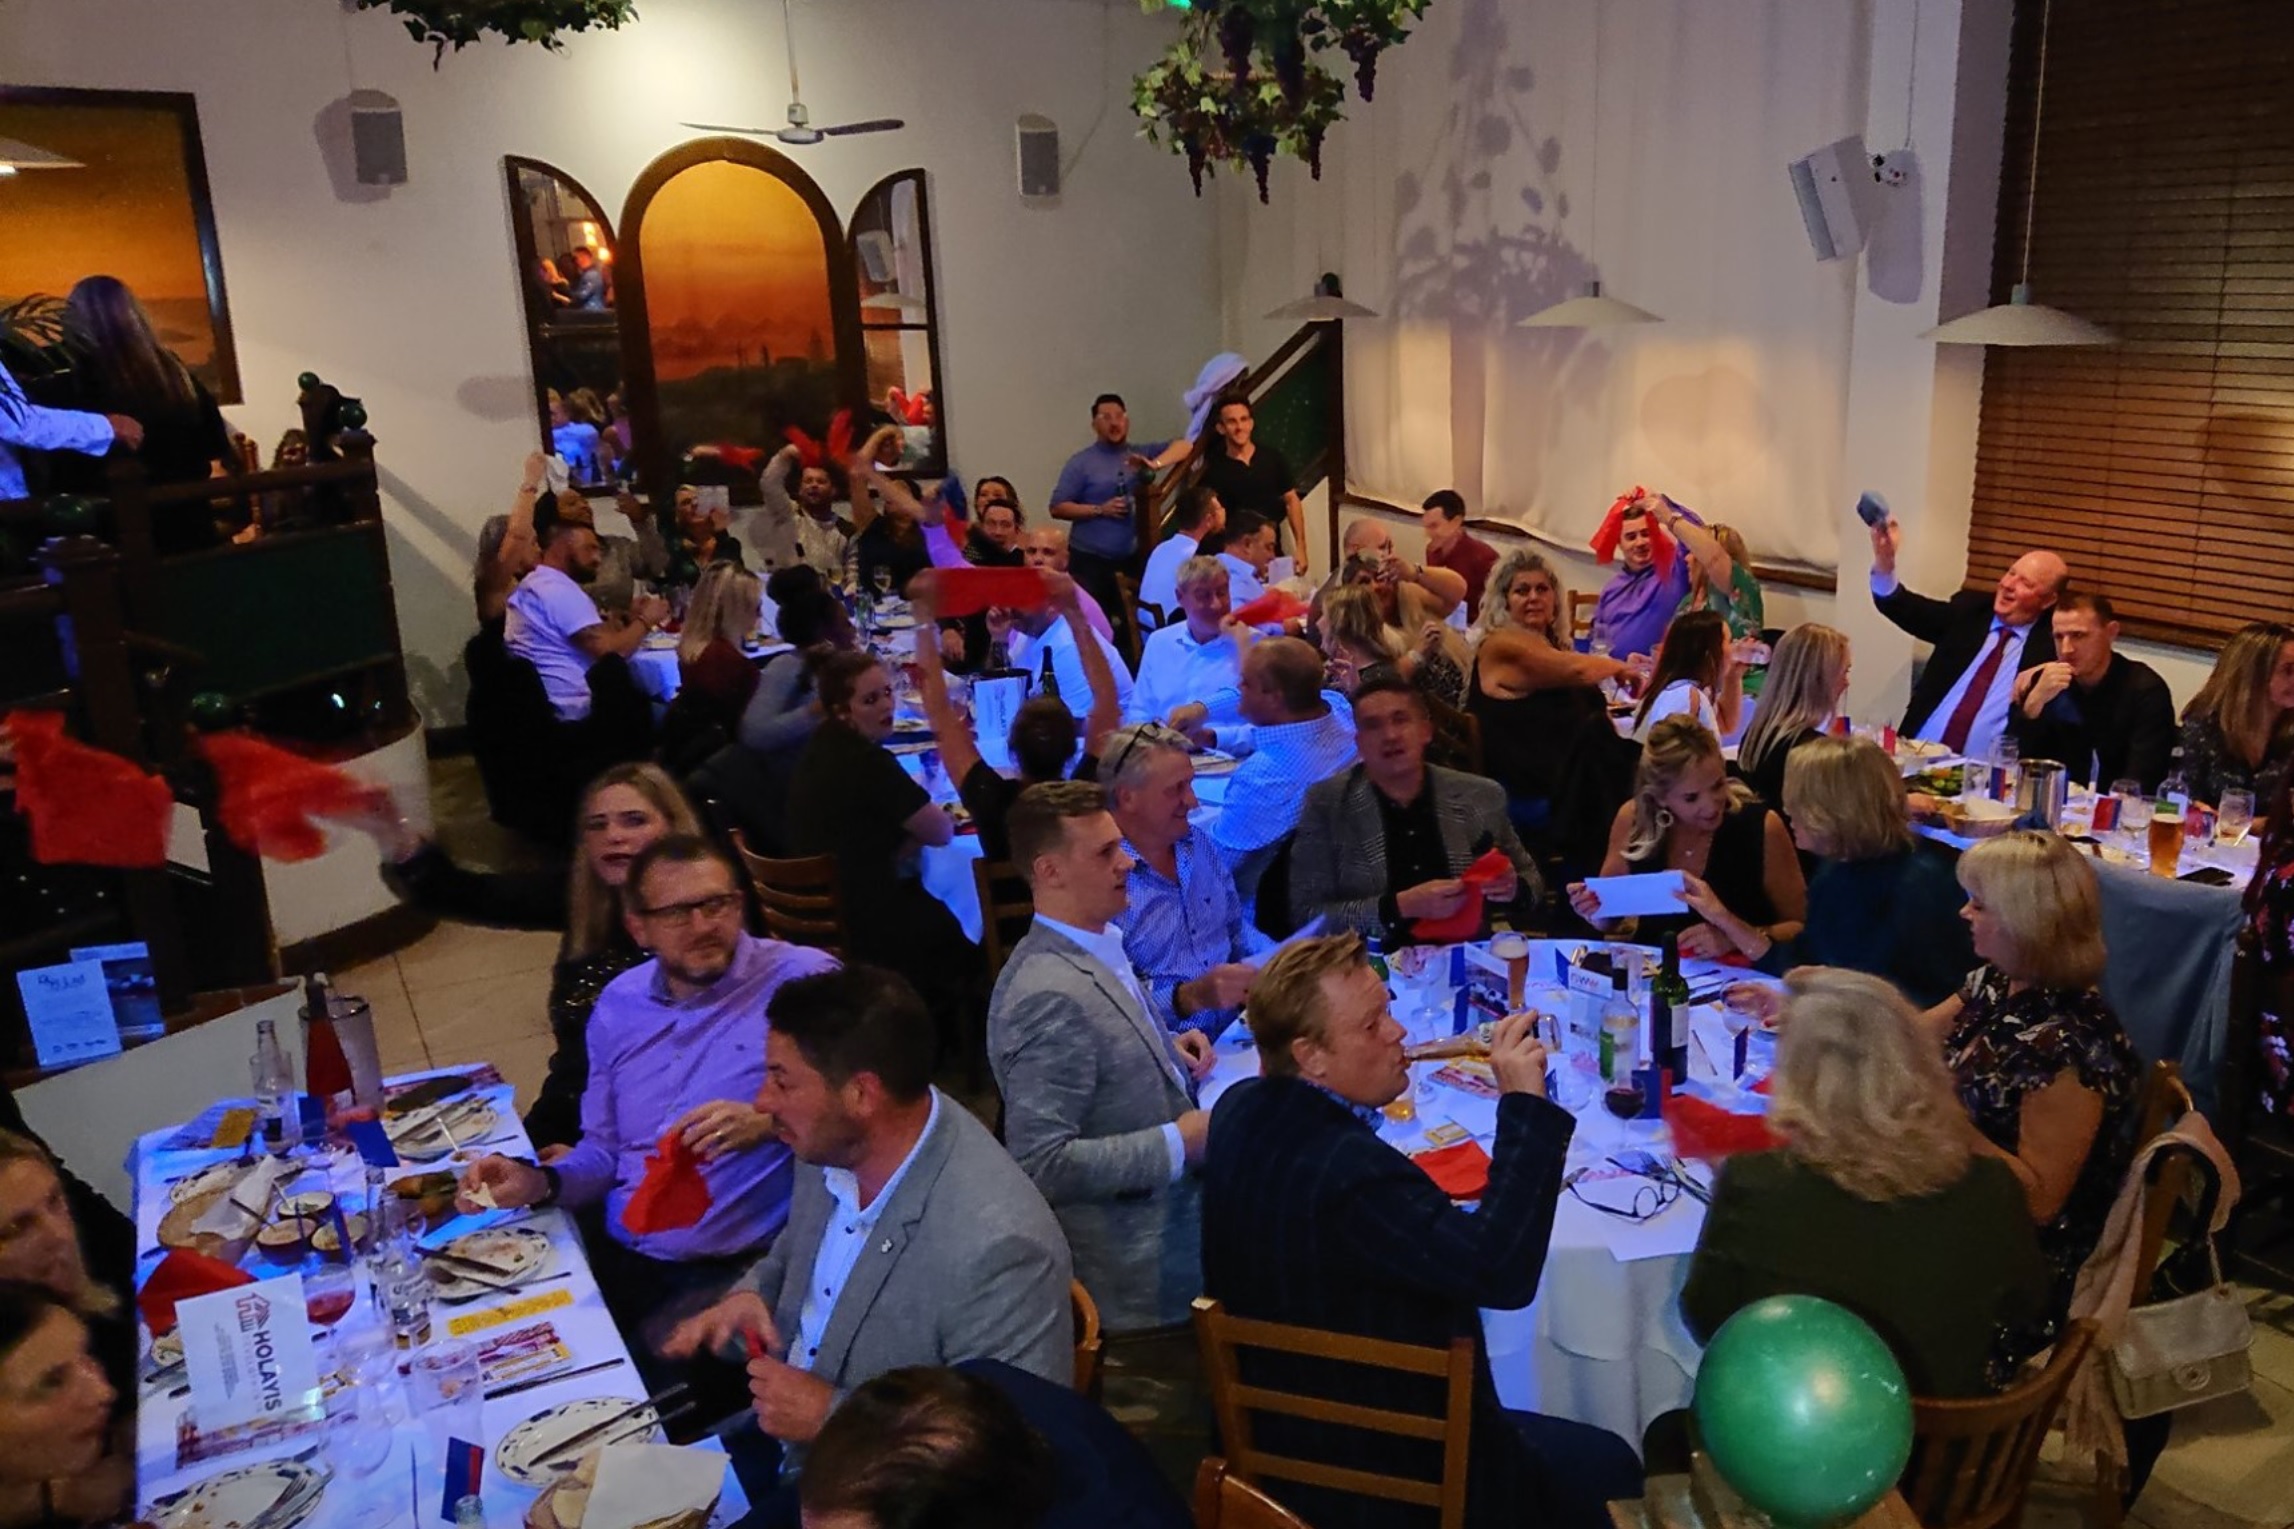 Sutton Christmas Toy Appeal raises £11k at glitzy evening of entertainment